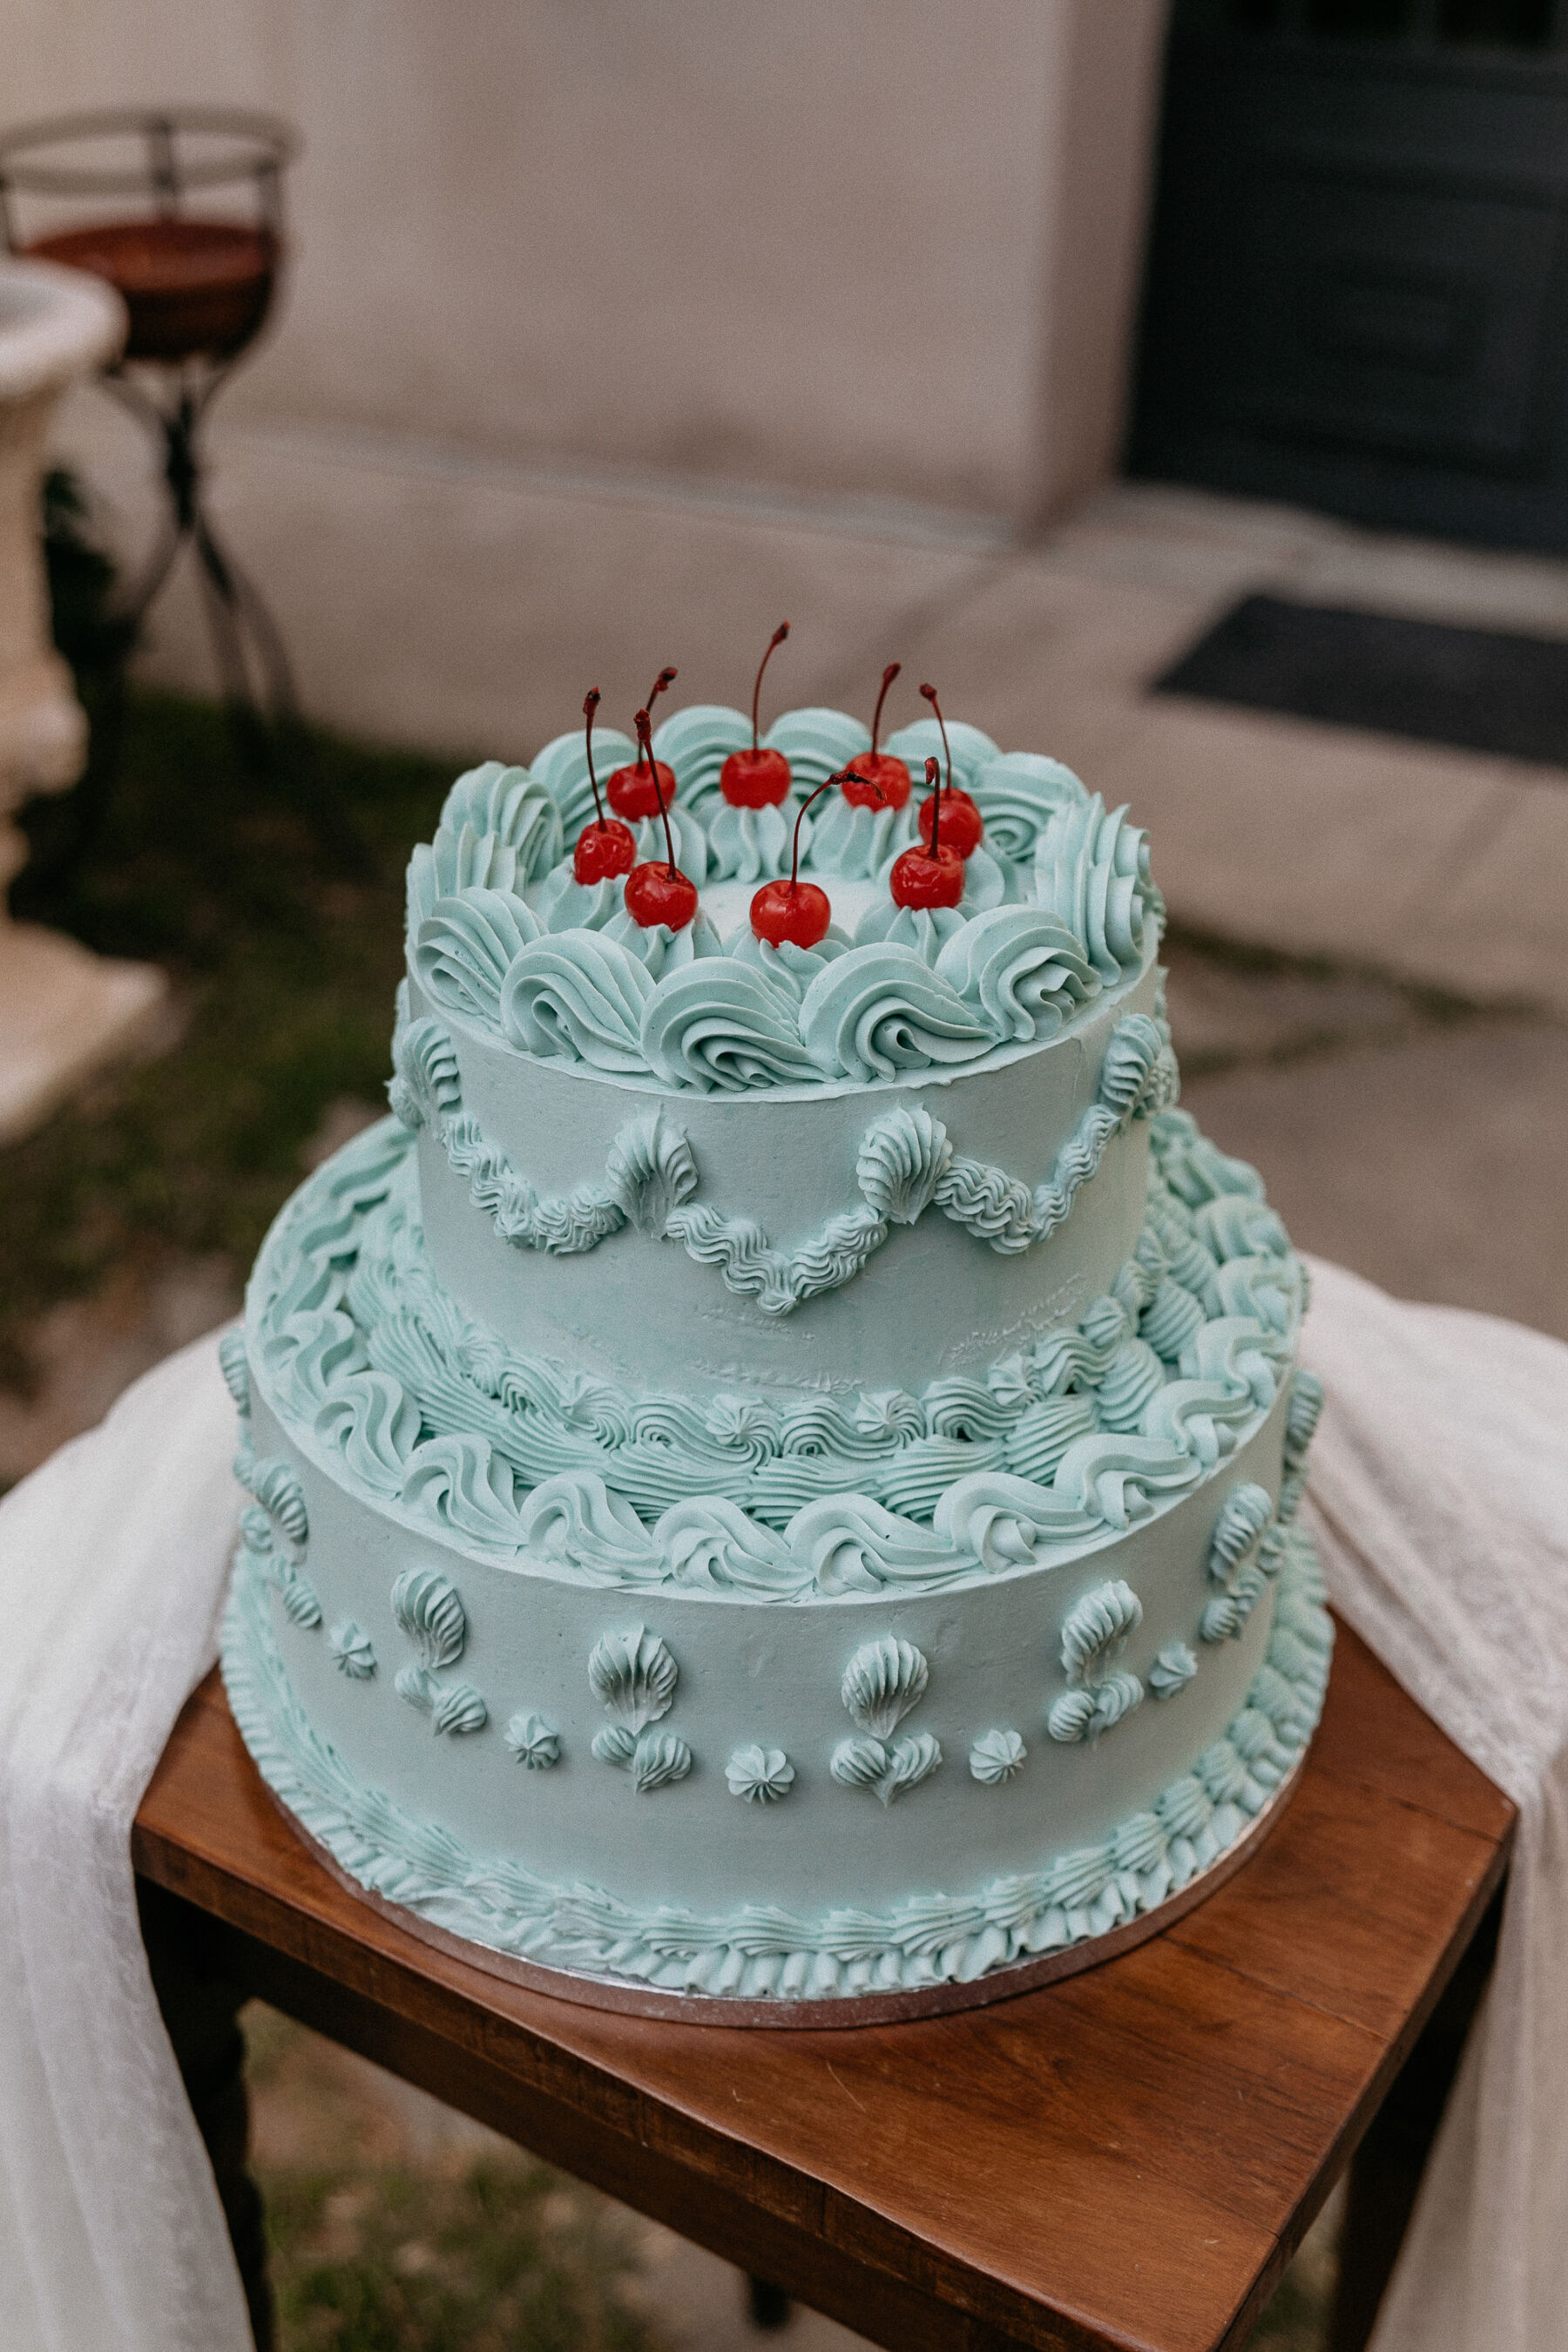 Fancy blue iced wedding cake topped with cherries.